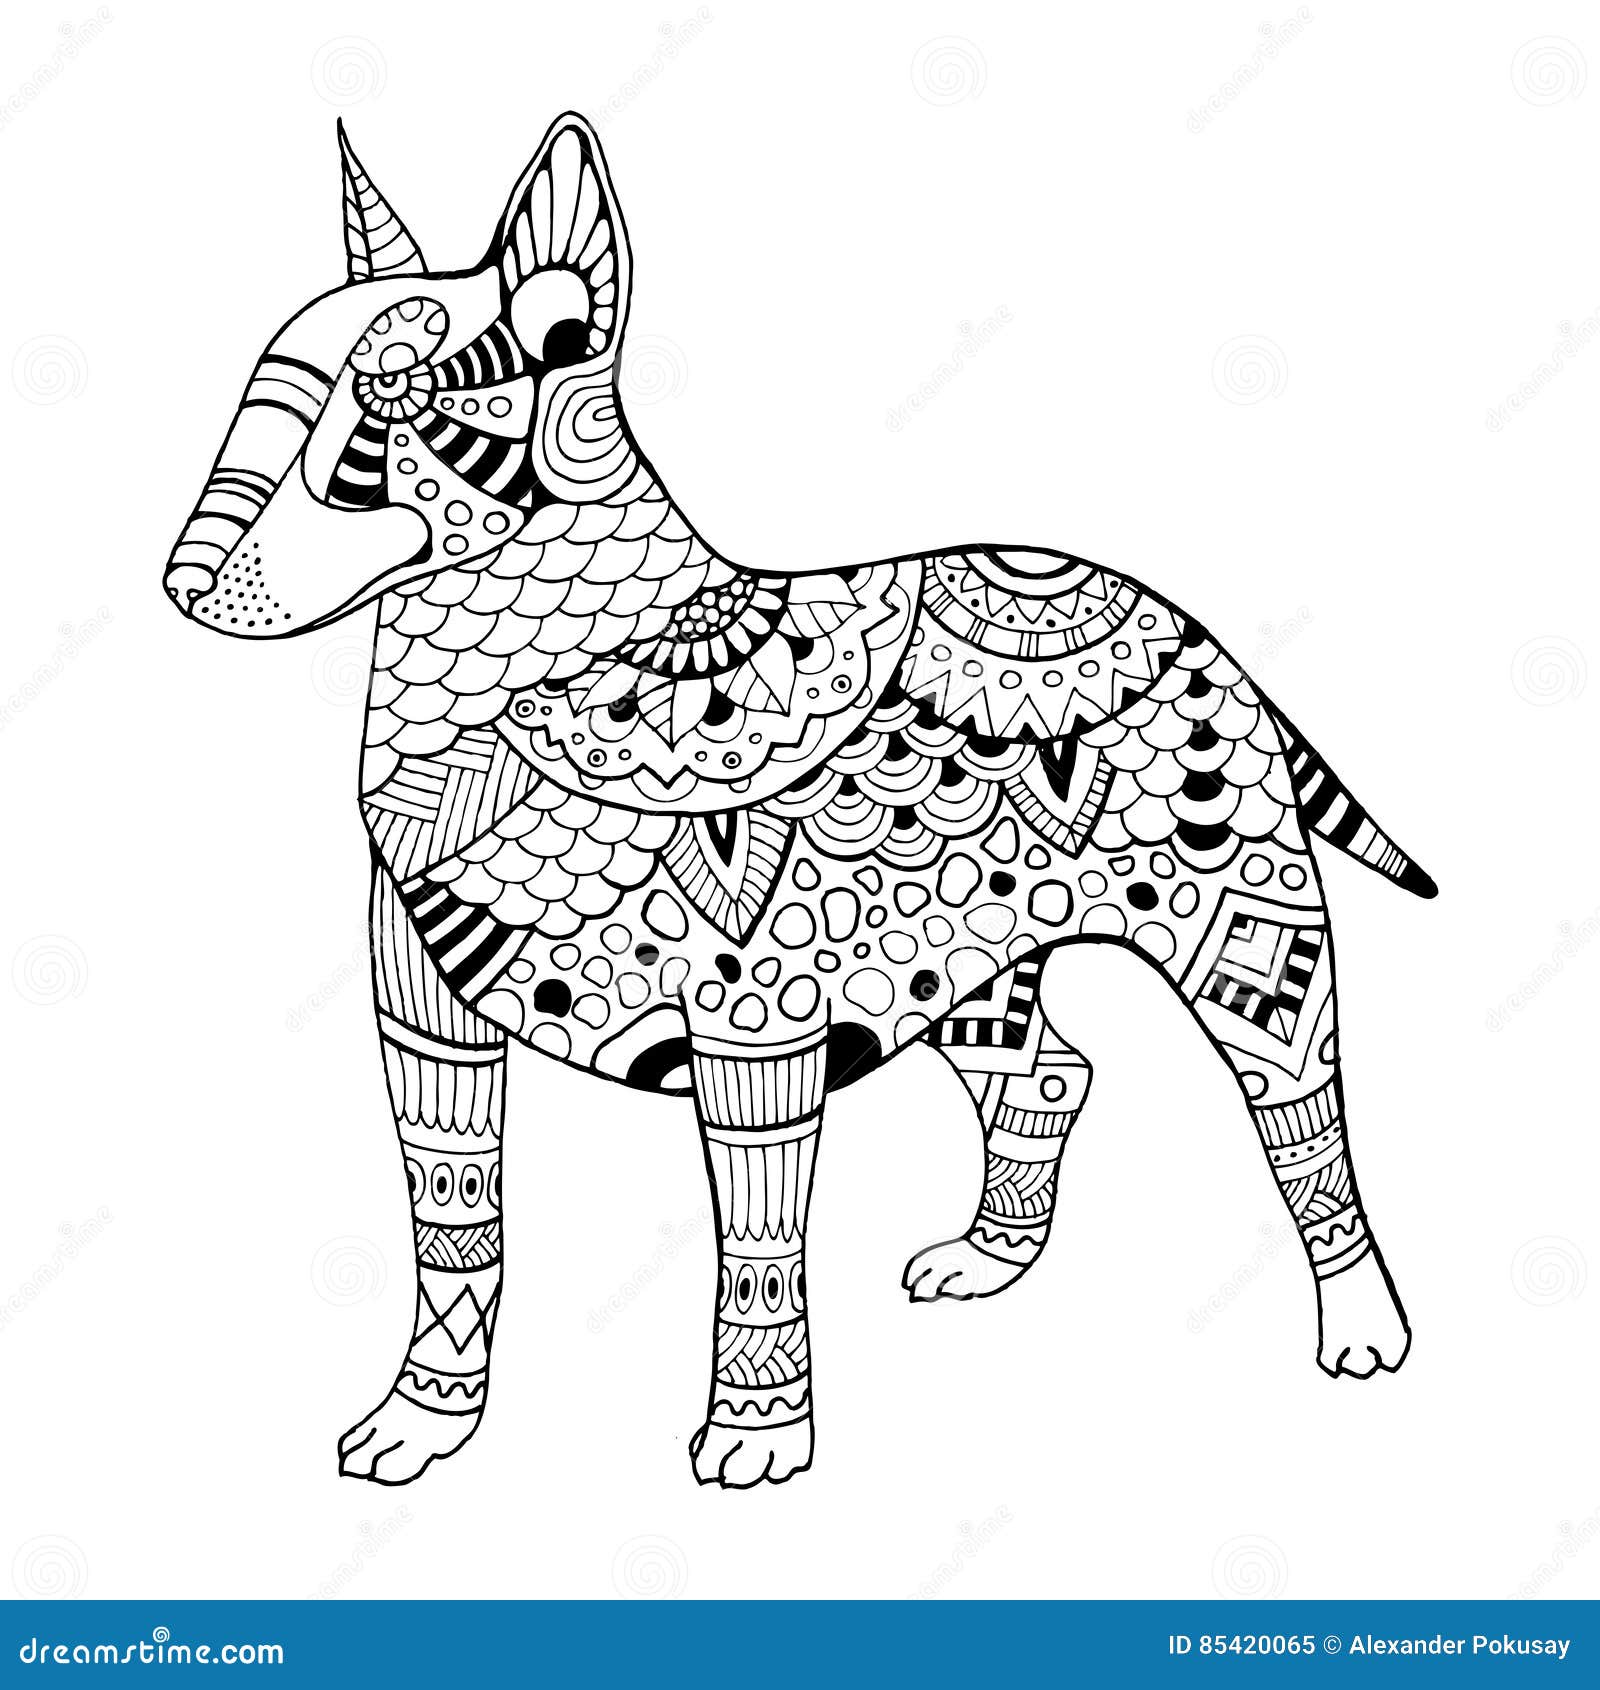 stock illustration bullterrier dog coloring book vector illustration anti stress adult tattoo stencil black white lines lace image